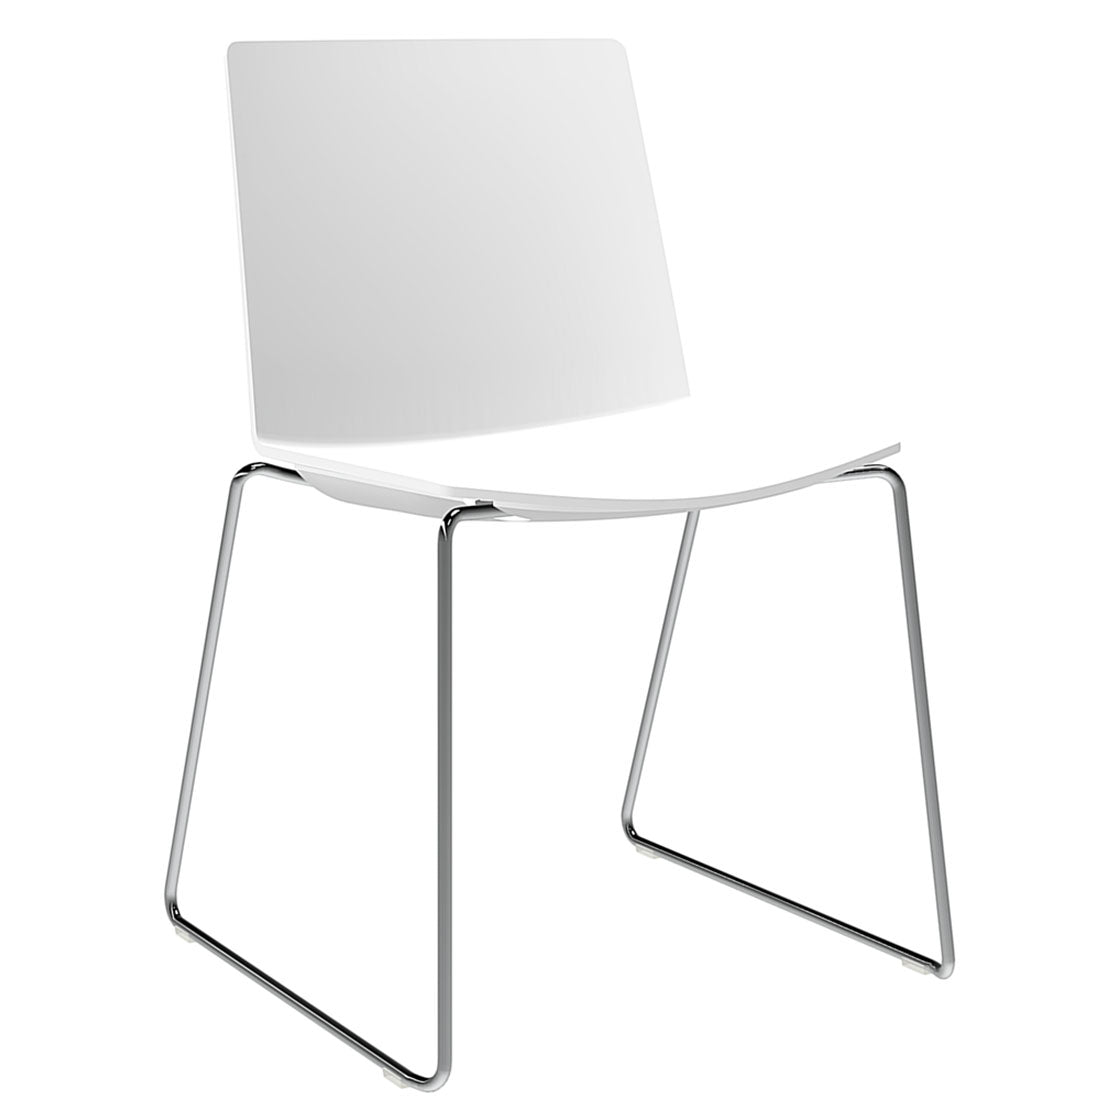 Jubel Visitor Chair - switchoffice.com.au